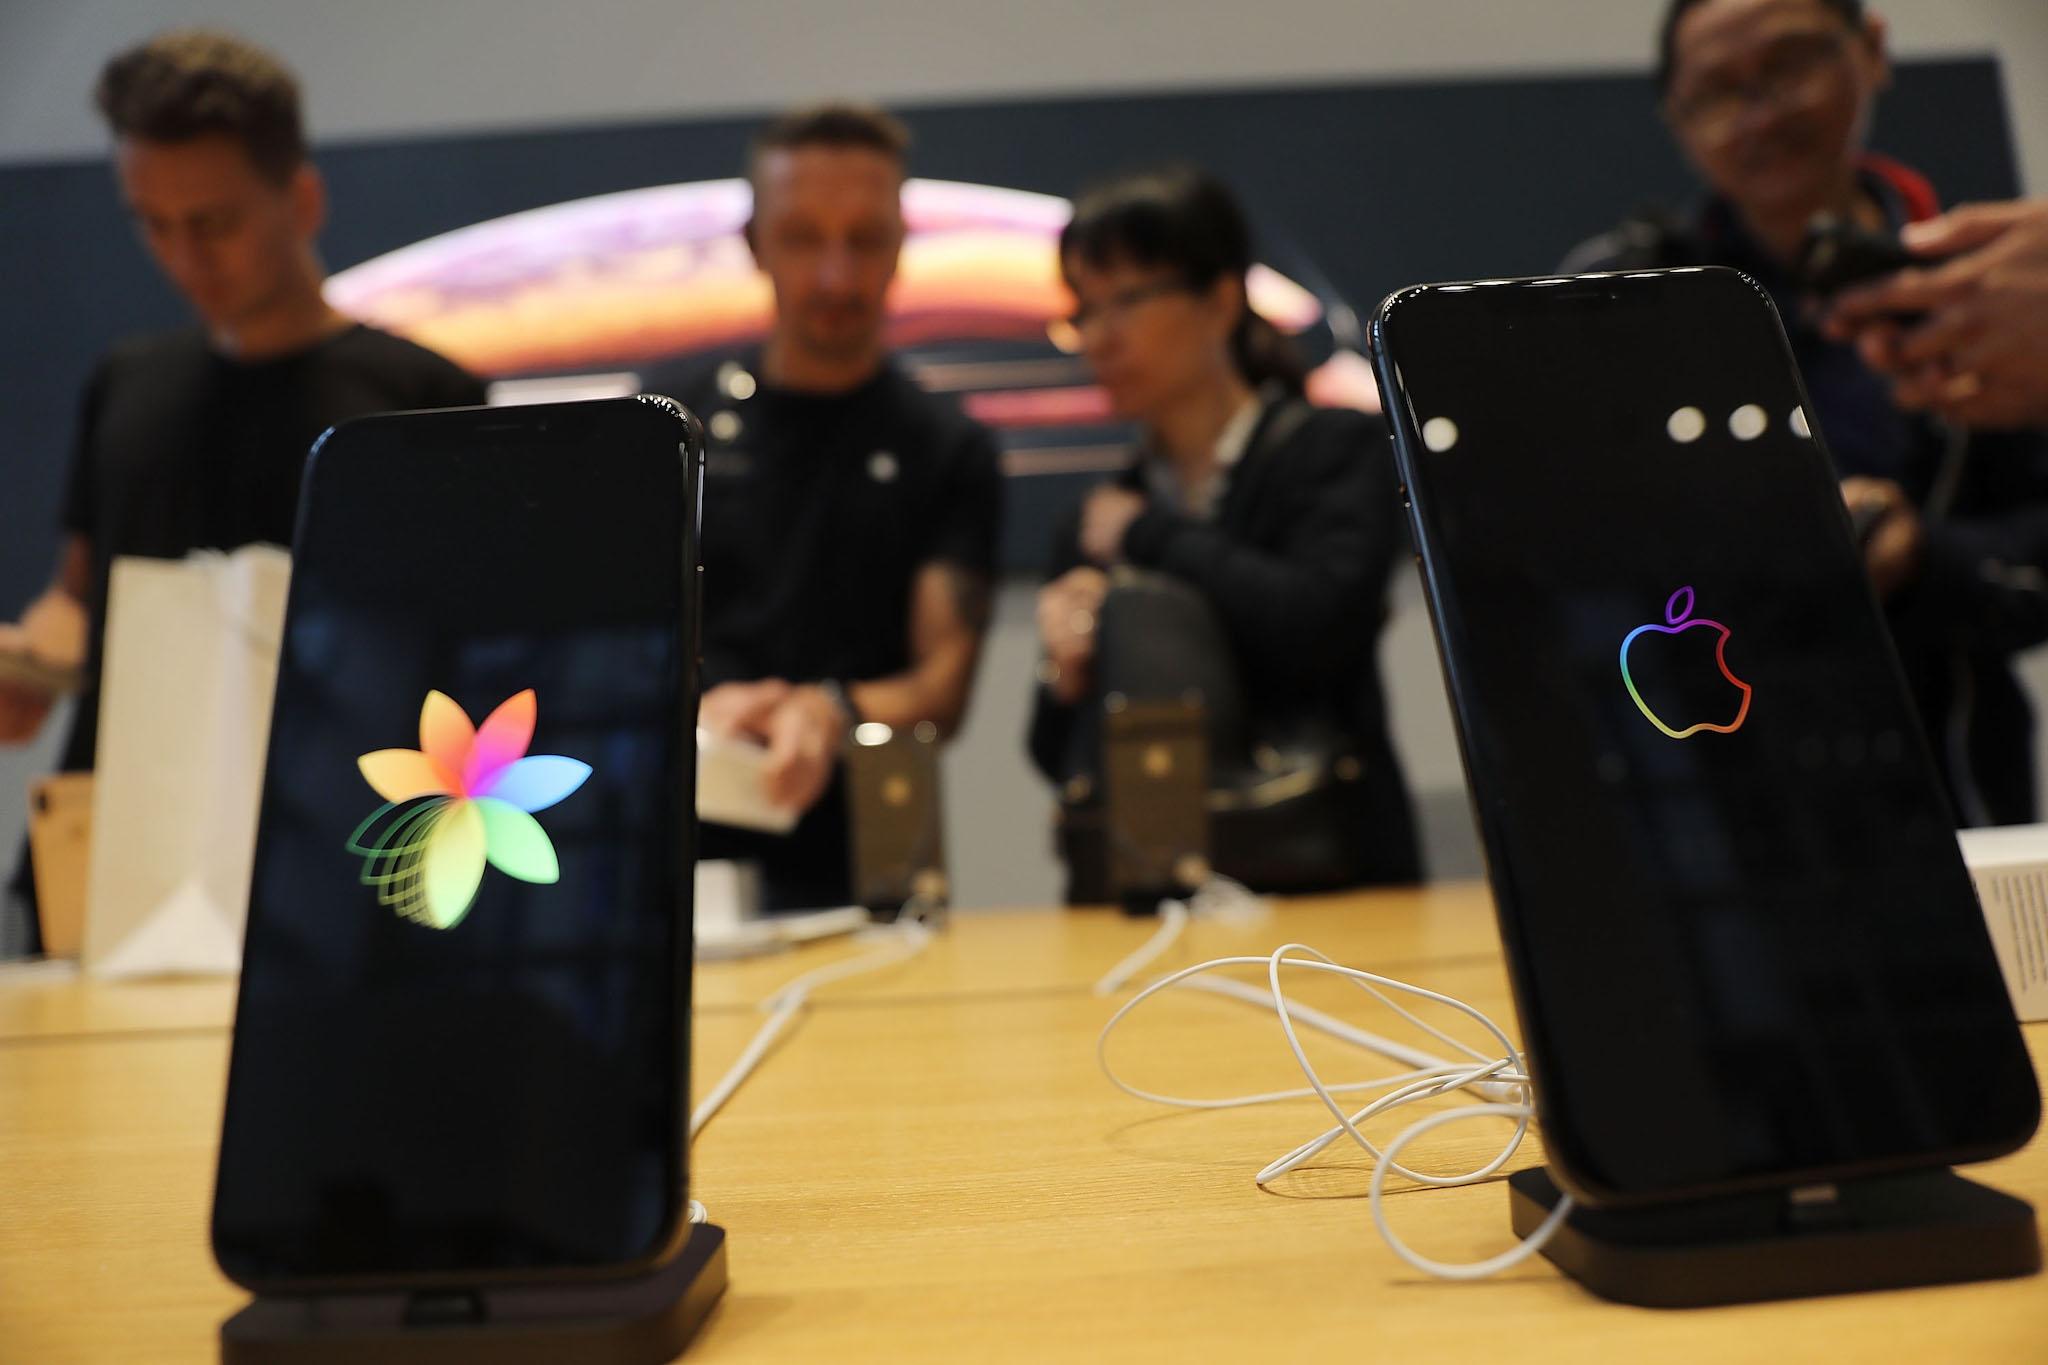 People purchase the new iPhone XS and XS Max at the Apple store in Midtown Manhattan on September 21, 2018 in New York City